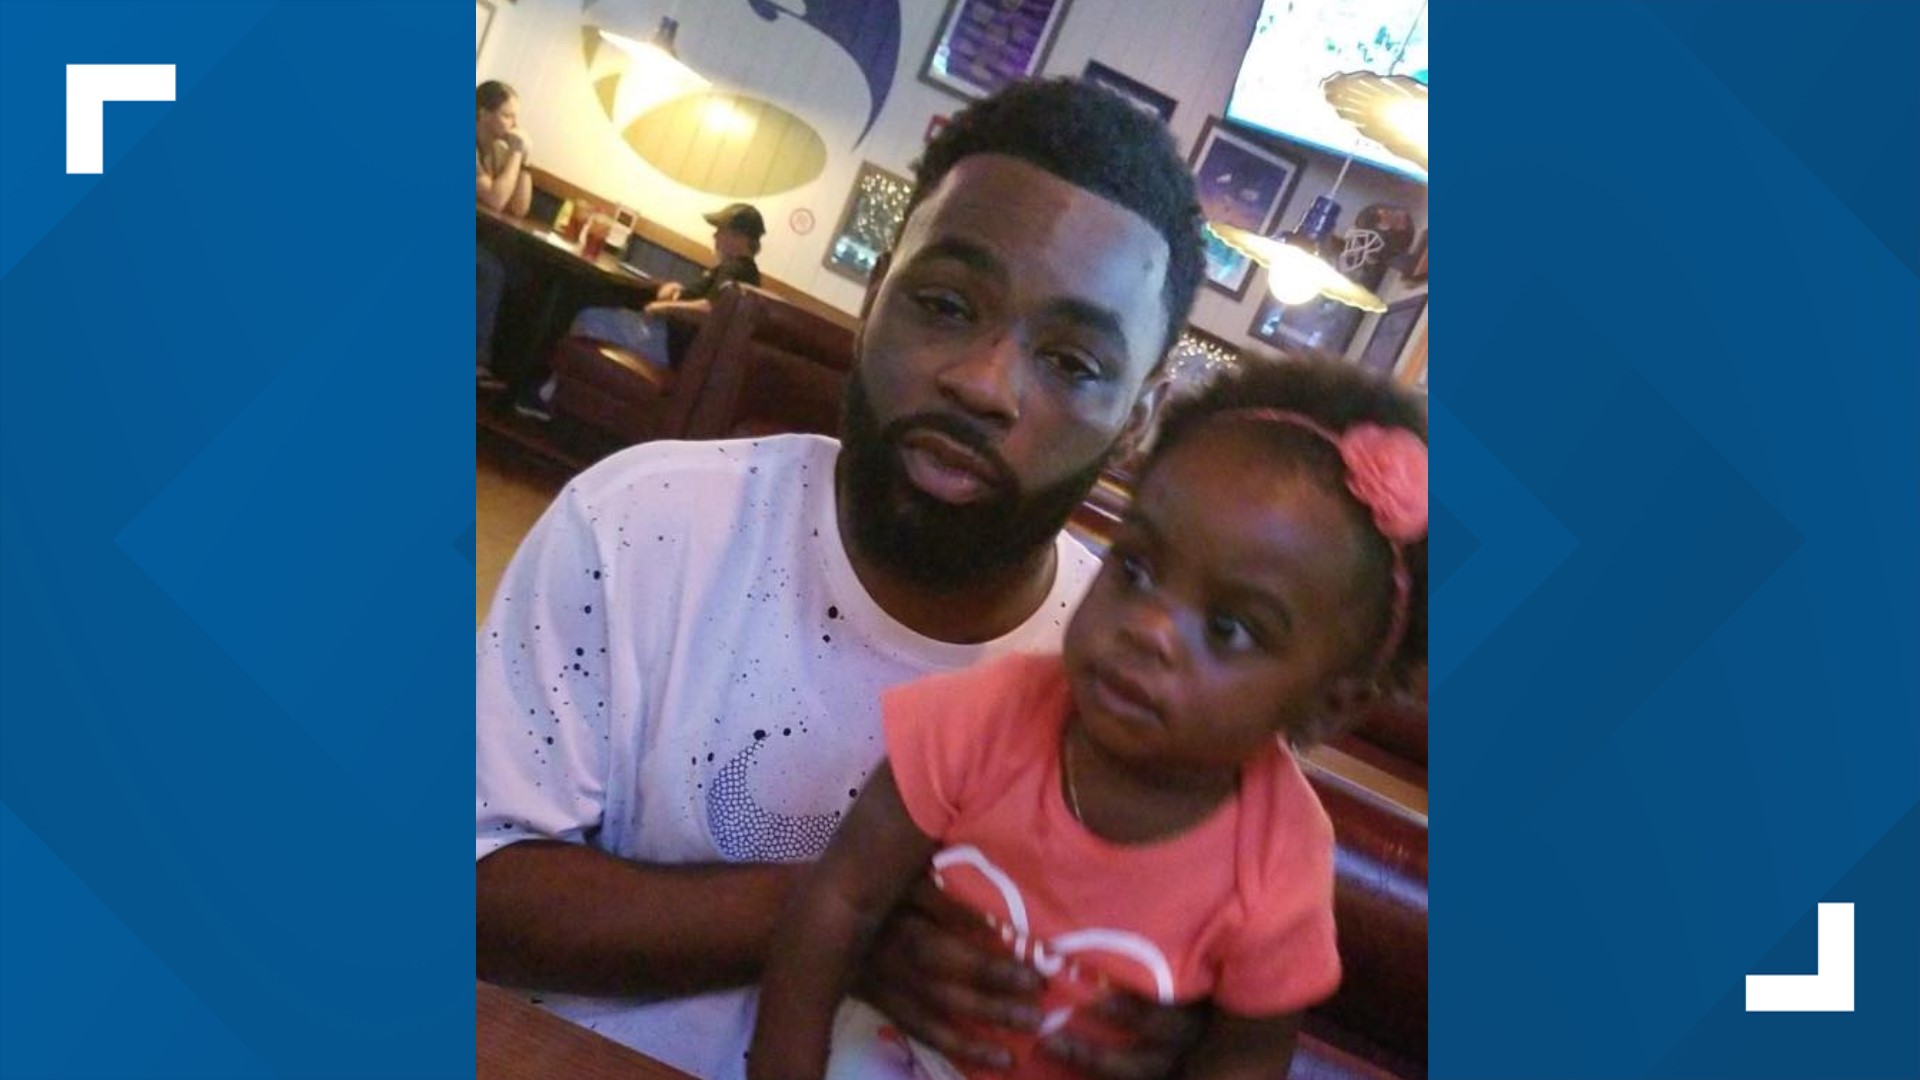 McKerick Guyton was shot to death in January 2019. The man charged in his murder, Jaswain Bell, was arrested again for two murders last month in Dublin.